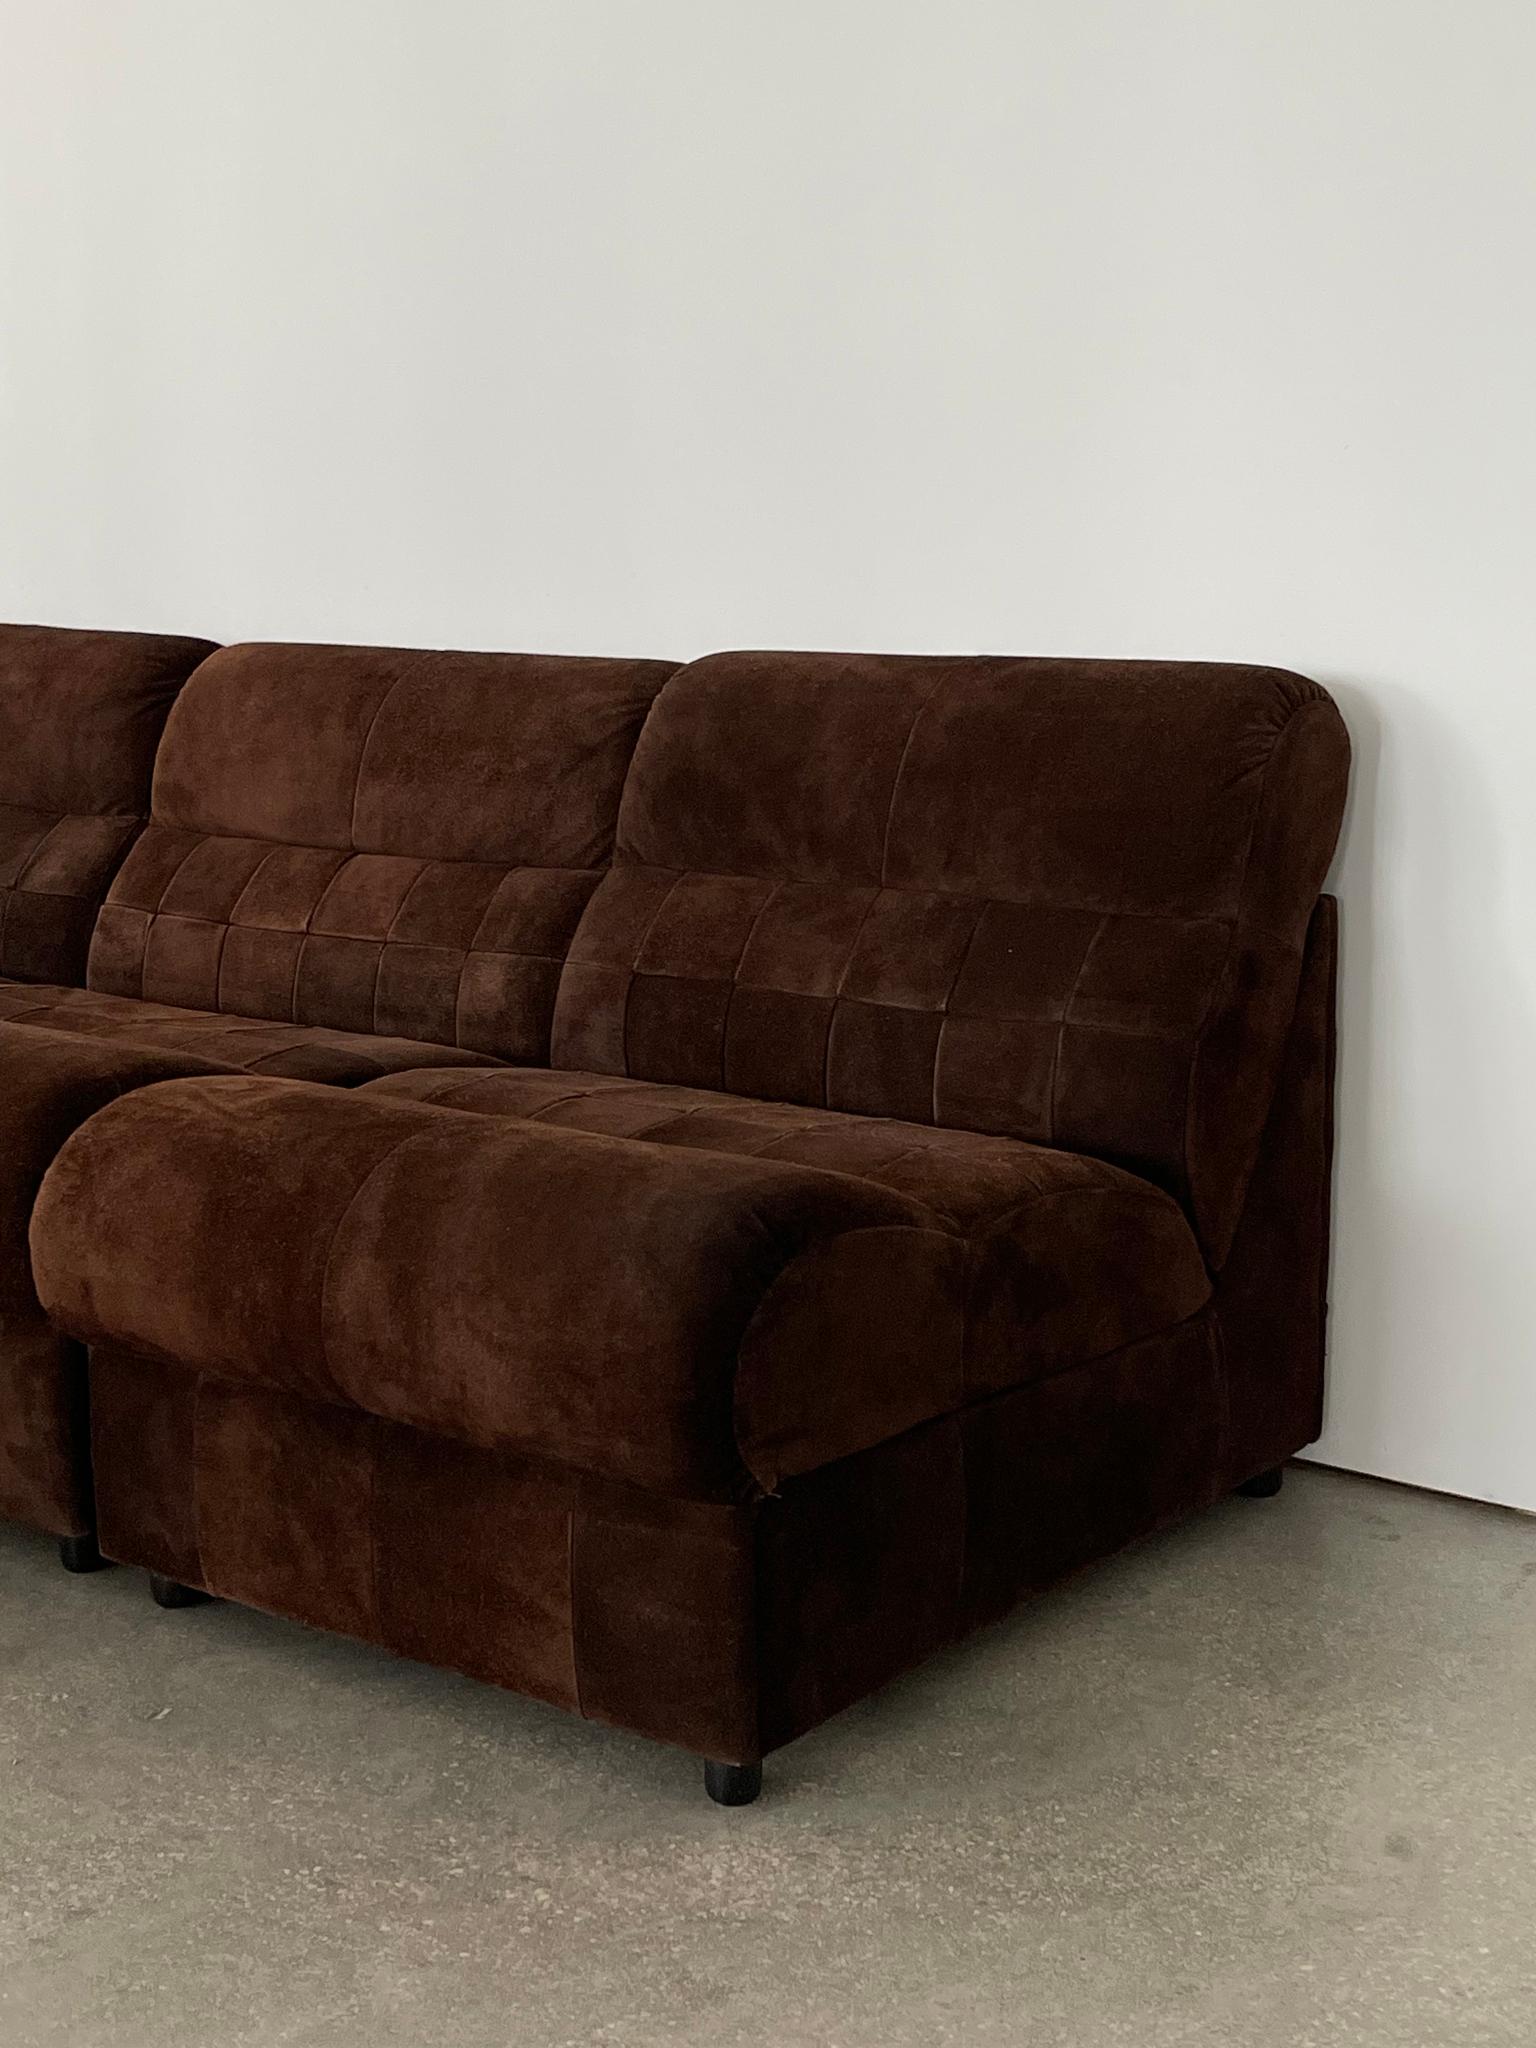 1960's Chocolate Suede Patchwork Percival Lafer Sectional Sofa 4